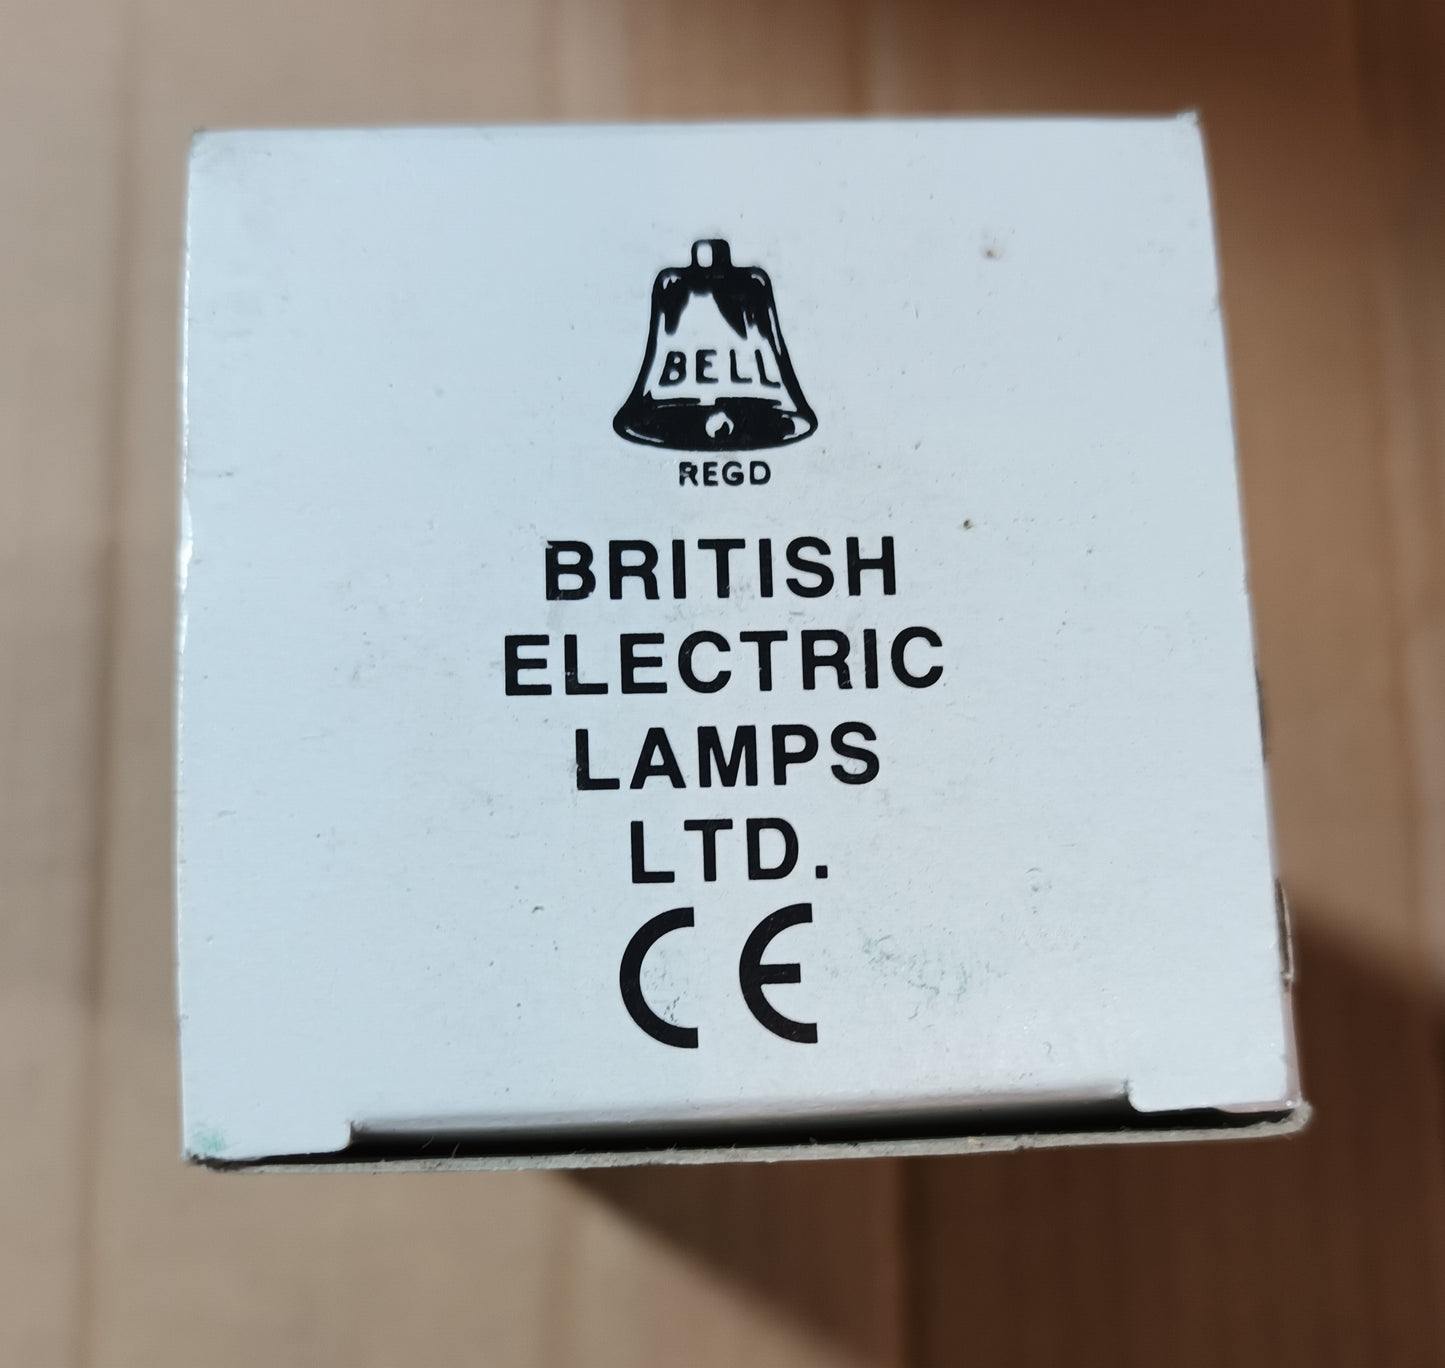 Bell 55mm candles  BC /B22 40watt clear twisted  British made pack of 3